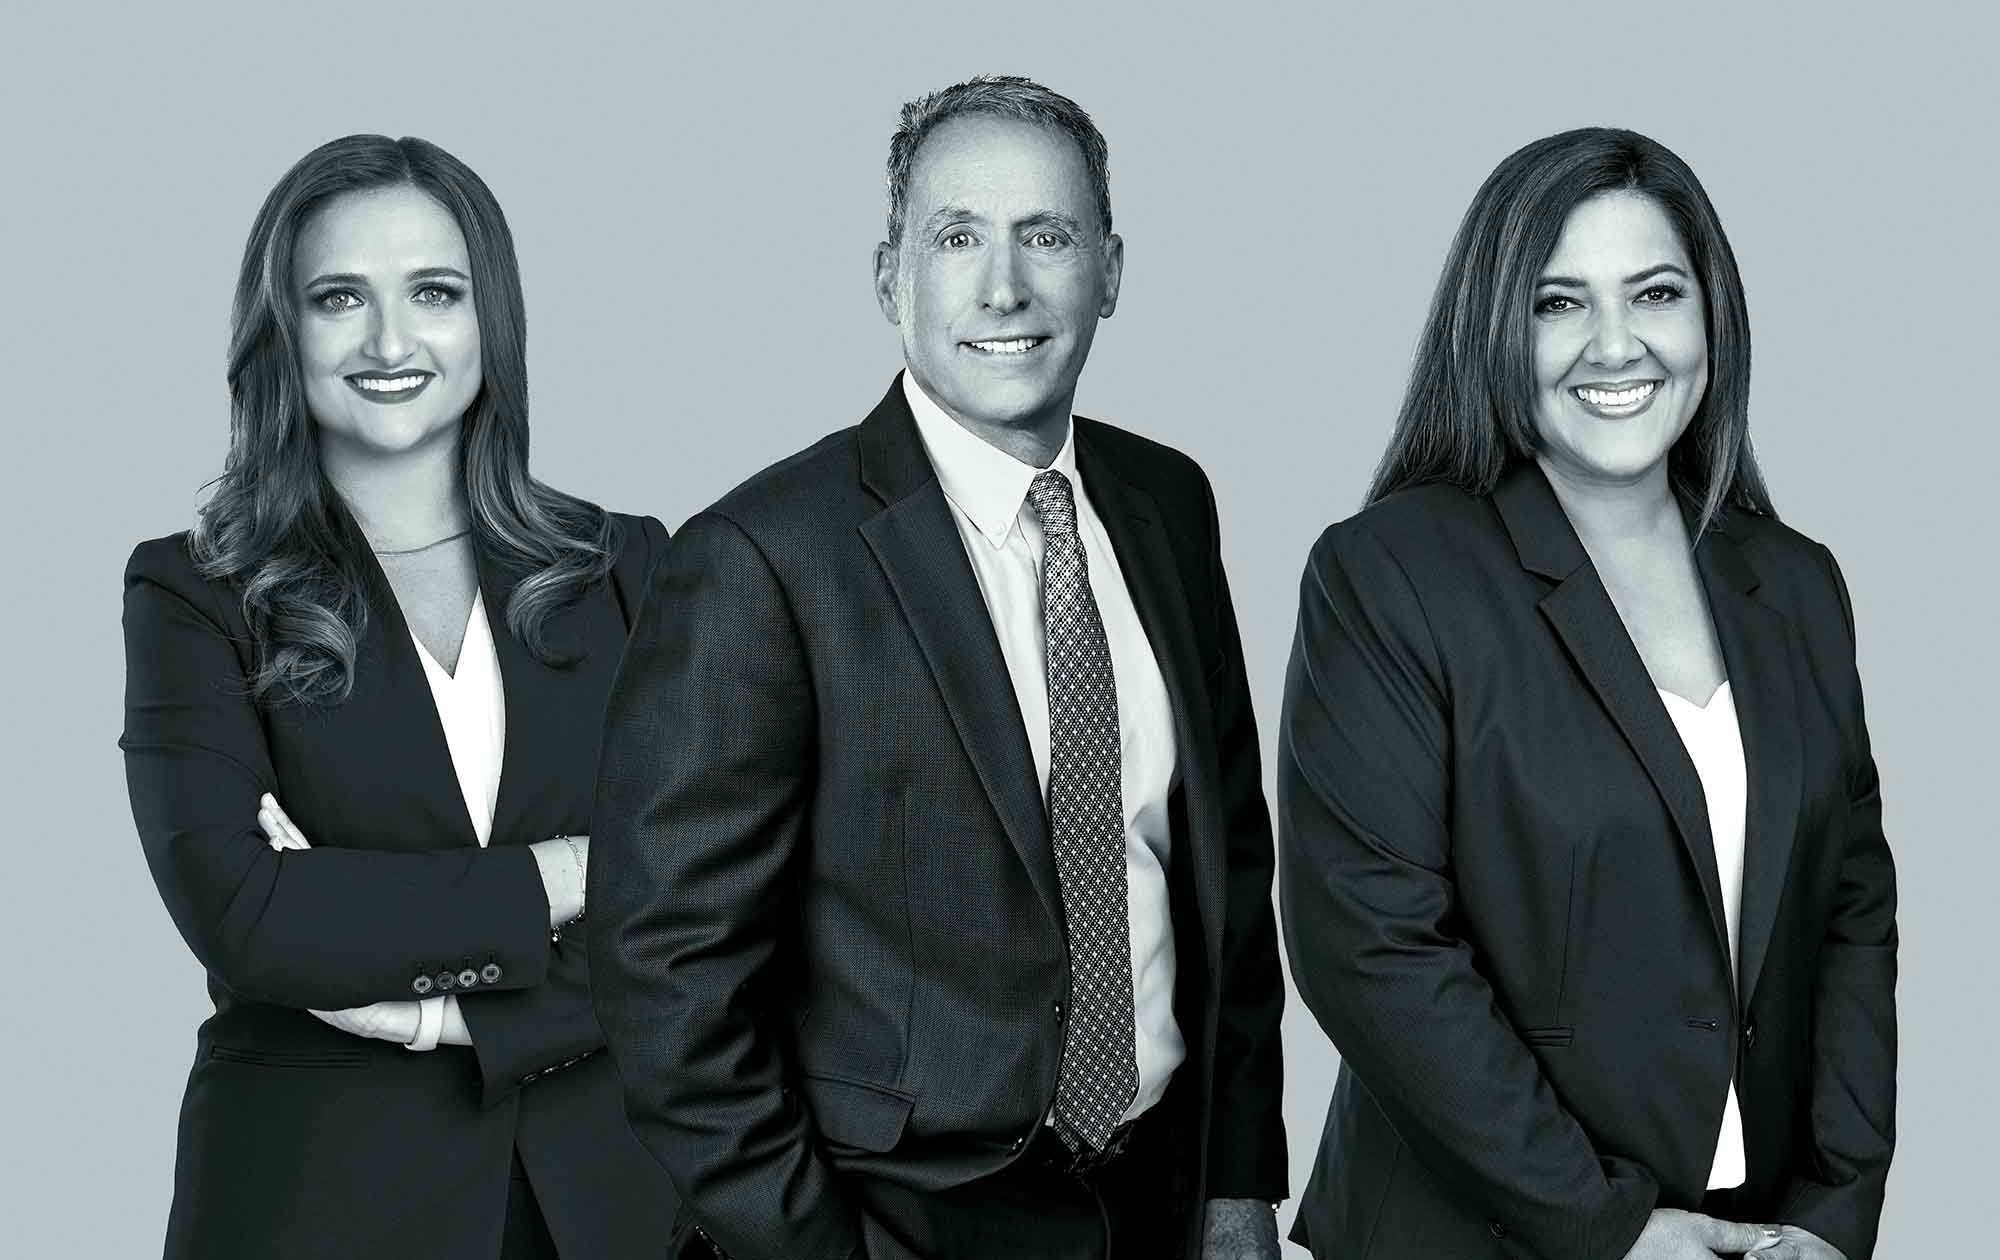 Nurse defense attorneys Robert K. Weinberg, Tsion Chudnovsky and Suzanne Crouts represent California nurses throughout the entire state of California.